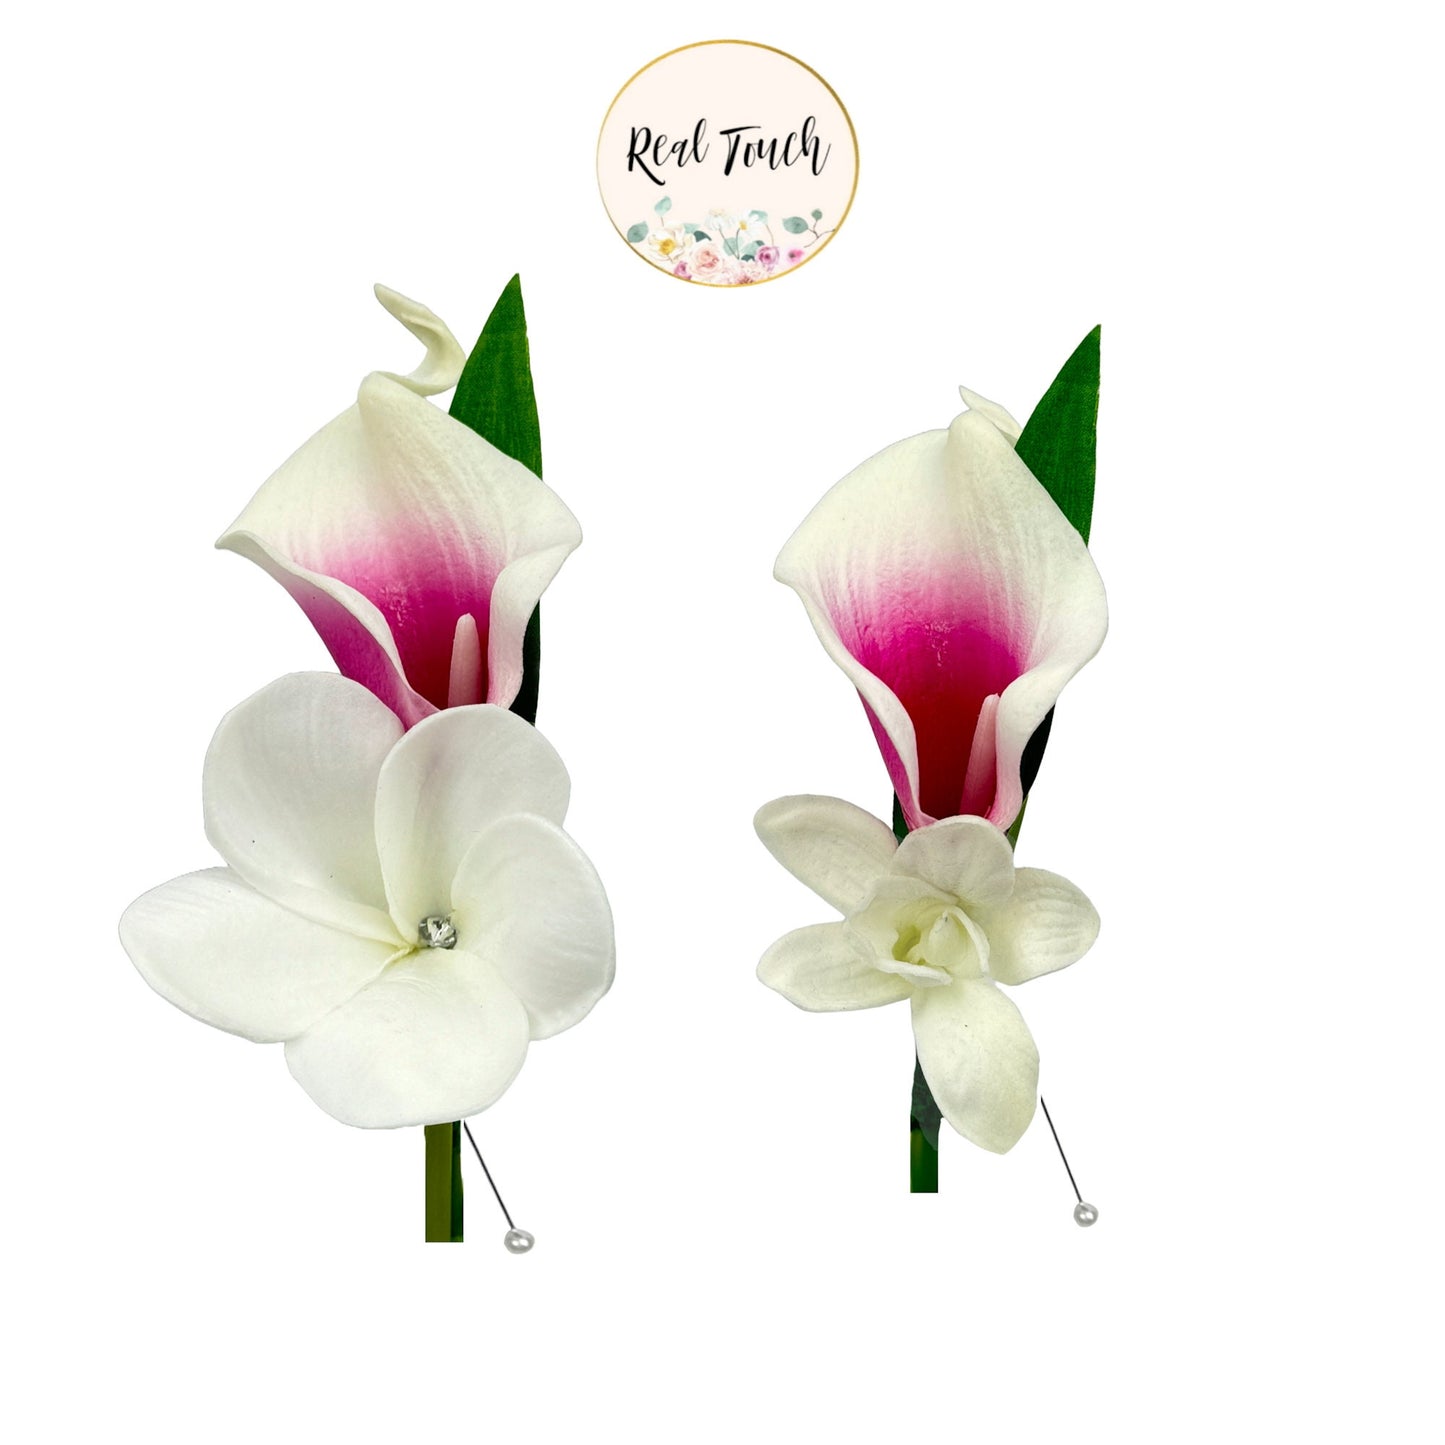 Eternal Tropical Bliss Boutonniere - Calla Lily, Plumeria, and Orchid Fusion